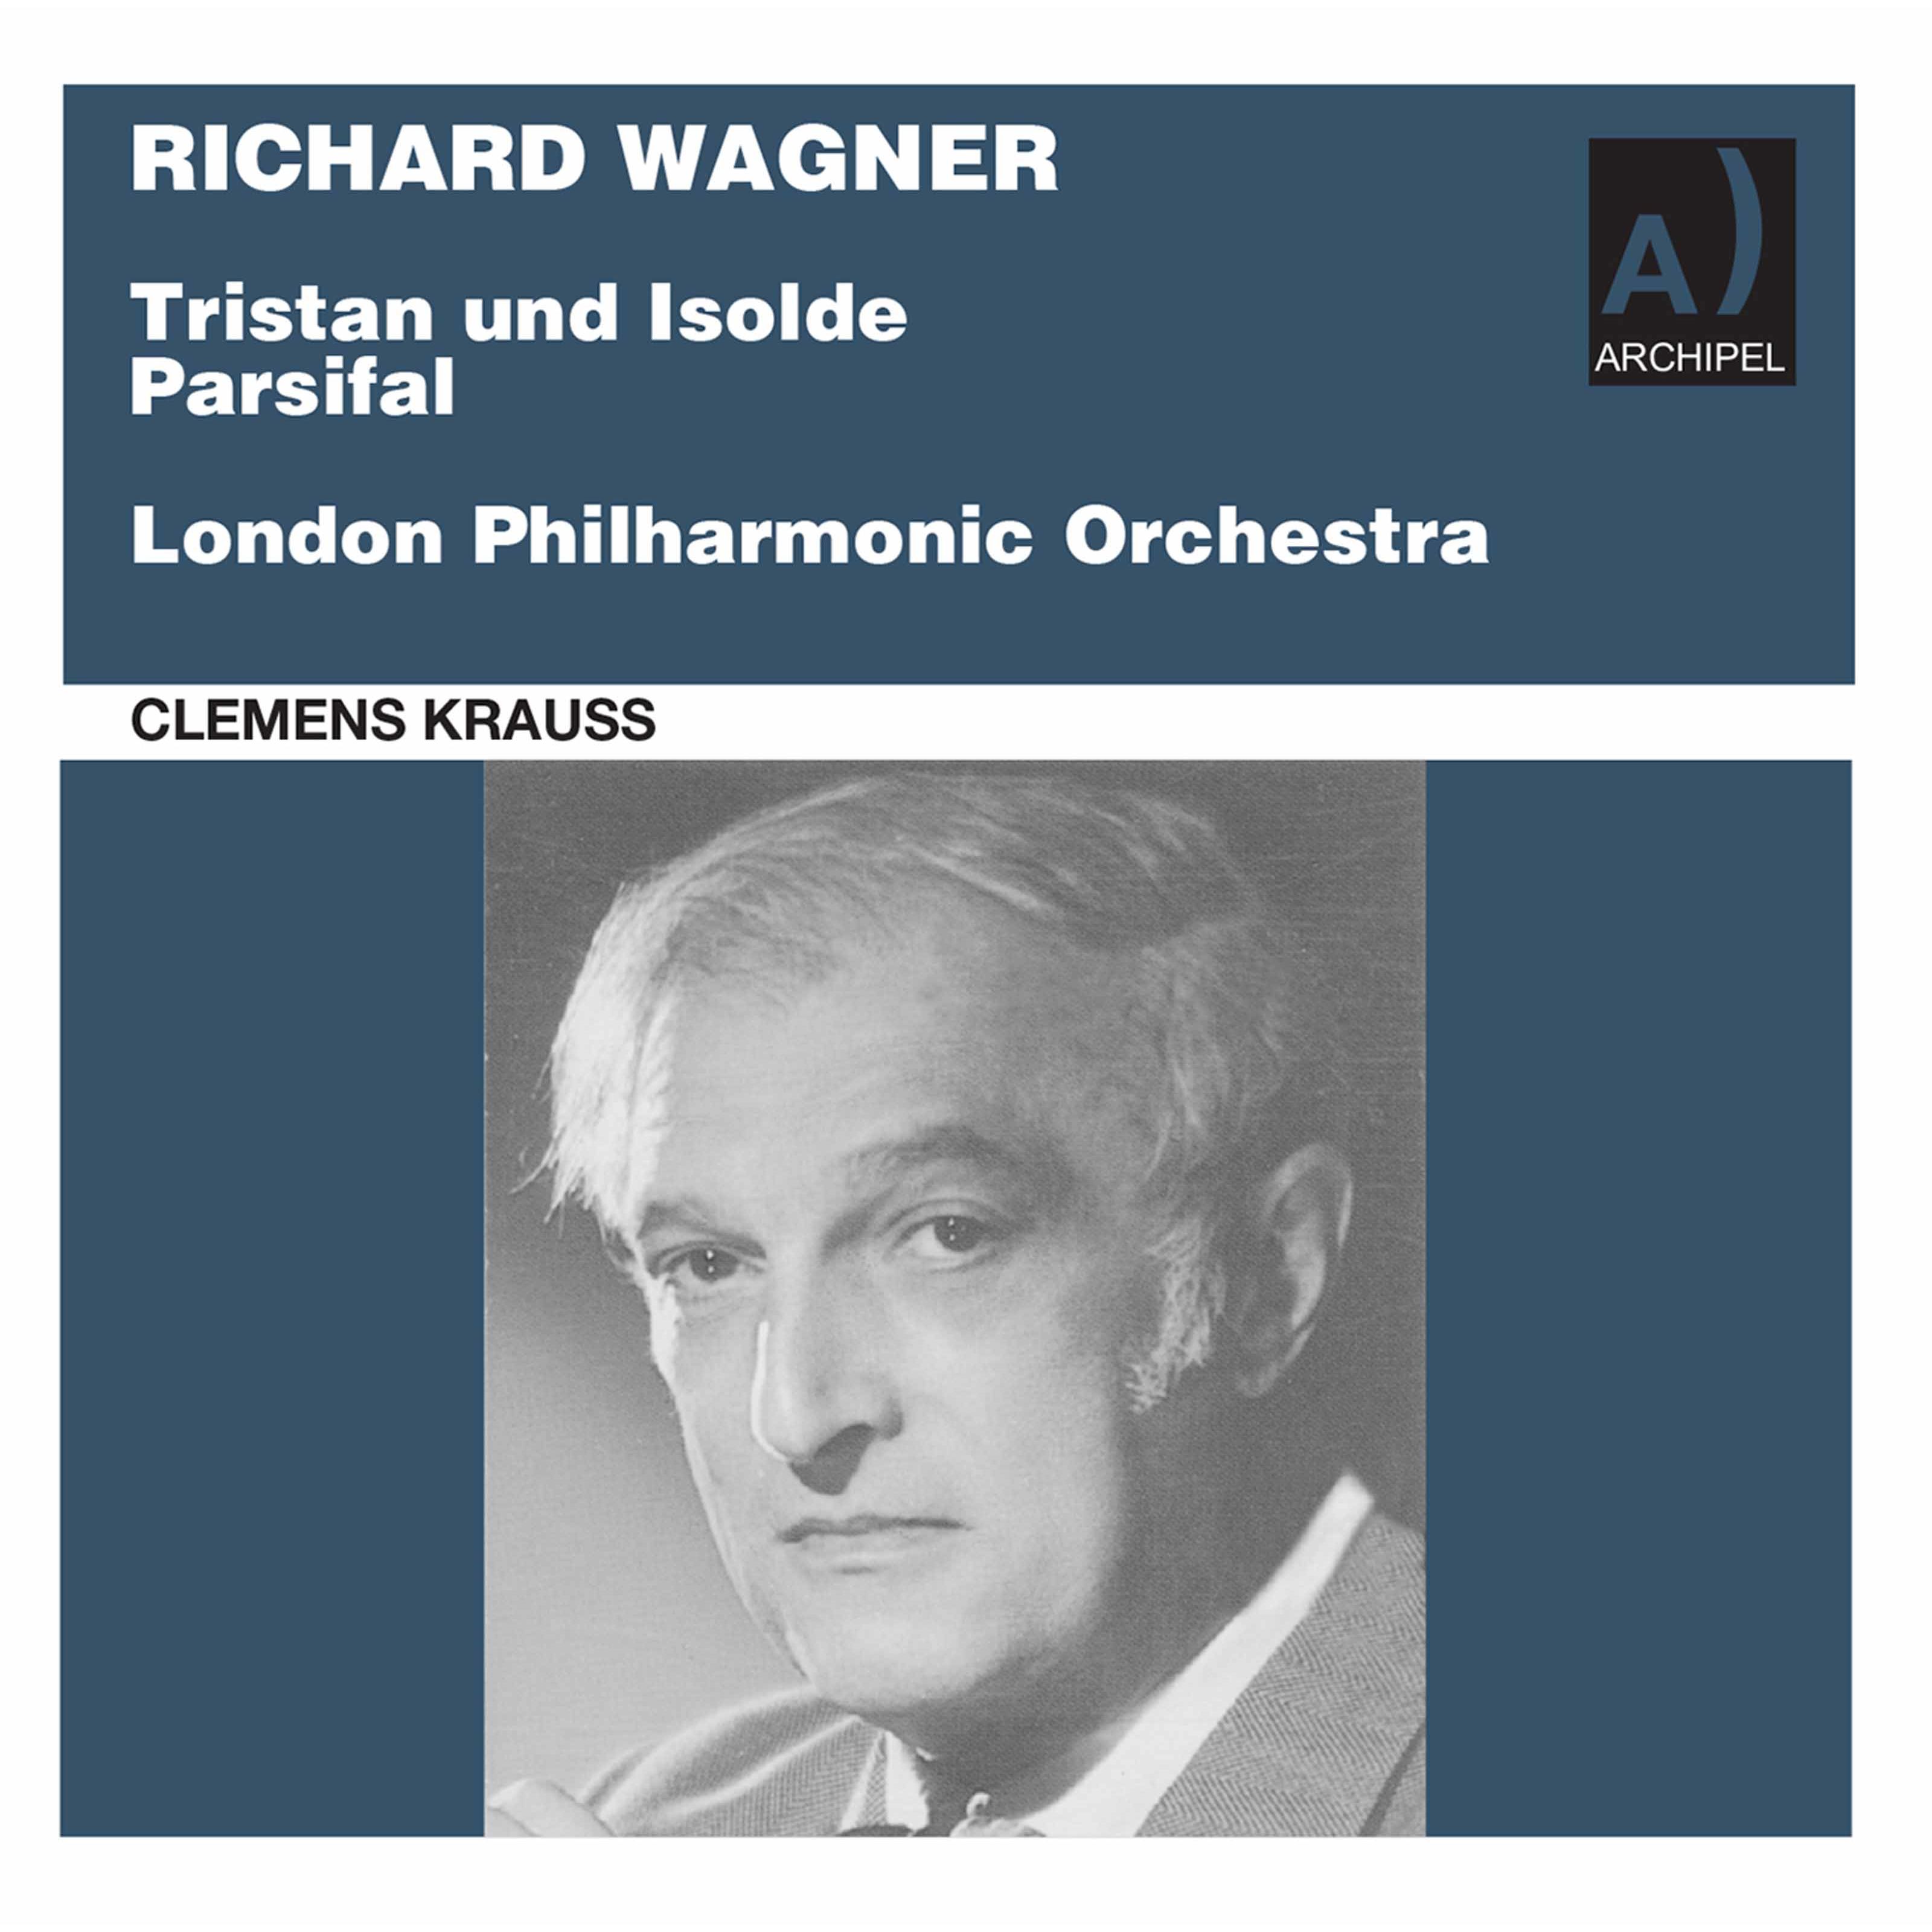 London Philharmonic Orchestra, Clemens Krauss – Wagner – Orchestral Works (2021) [FLAC 24bit/48kHz]